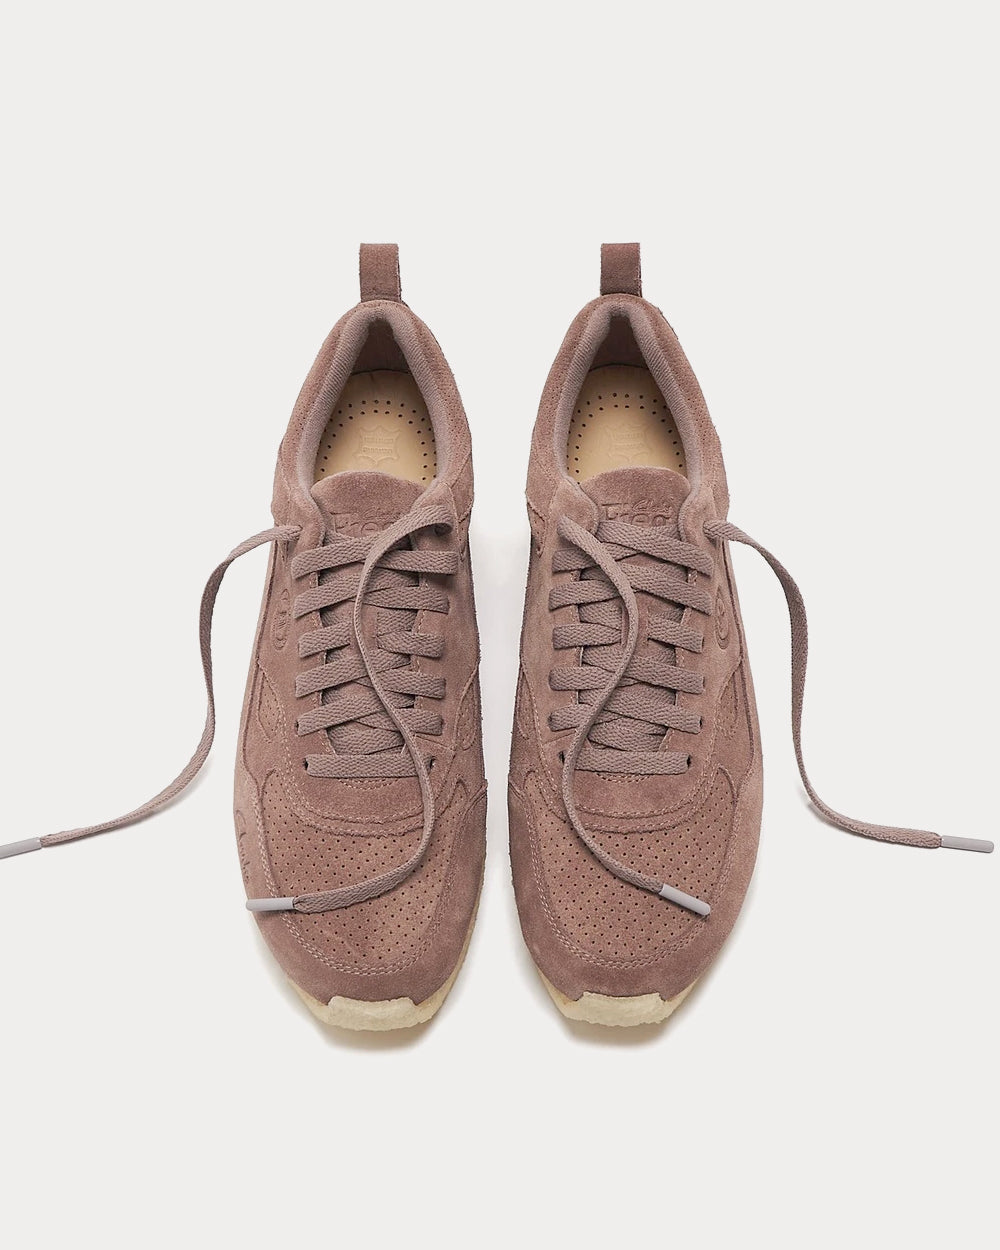 Clarks x Kith - Lockhill Suede Mauve Low Top Sneakers